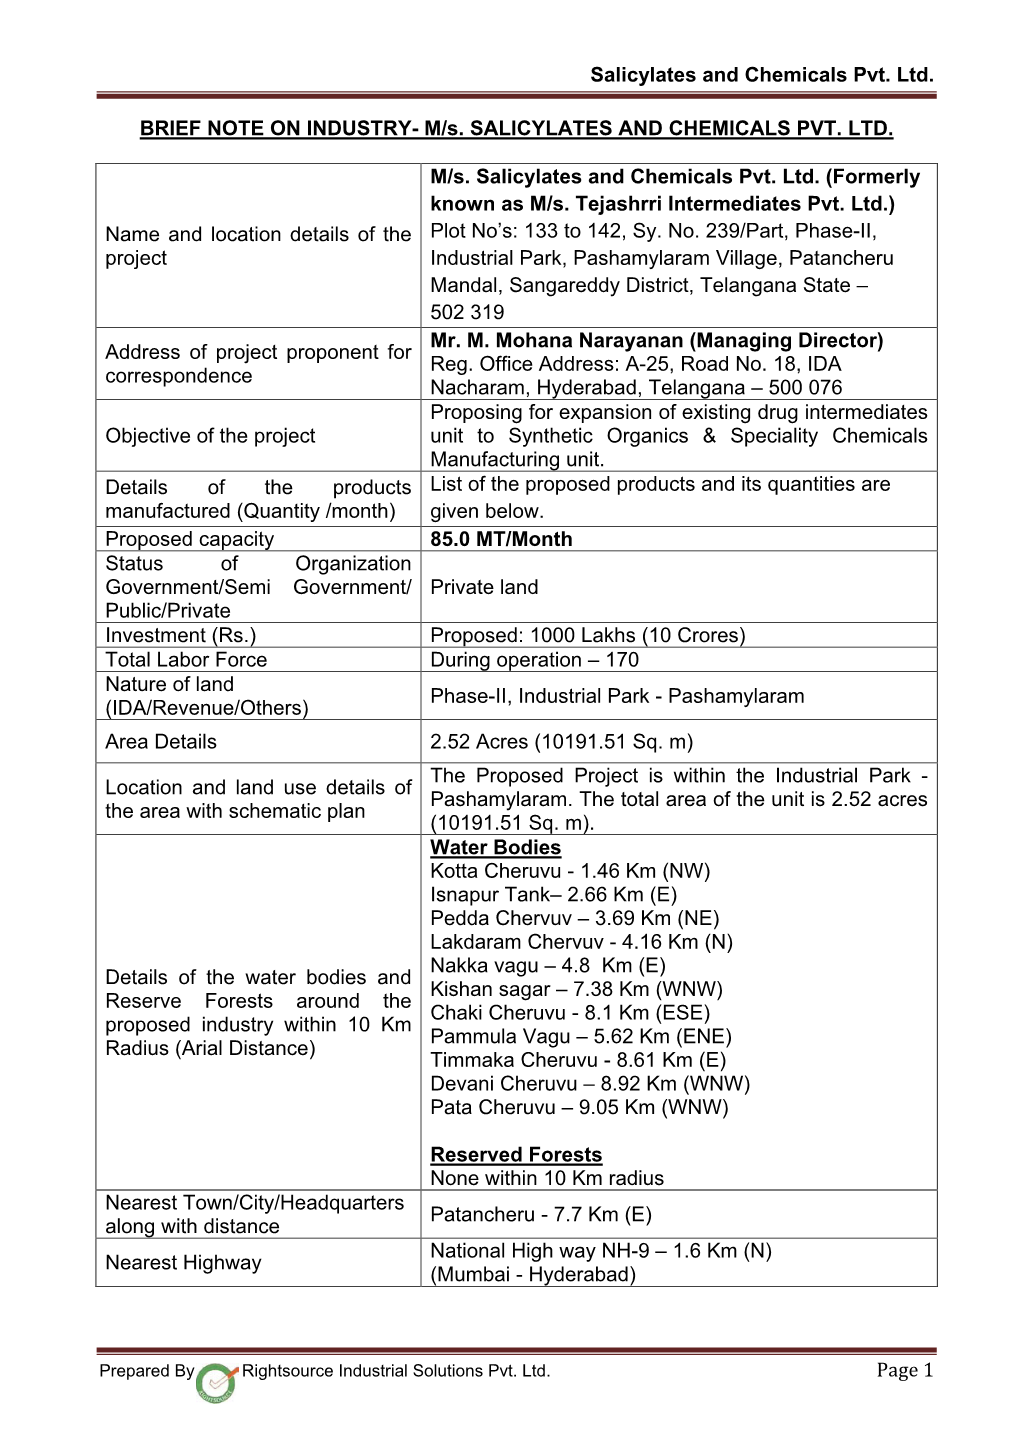 Salicylates and Chemicals Pvt. Ltd. BRIEF NOTE on INDUSTRY